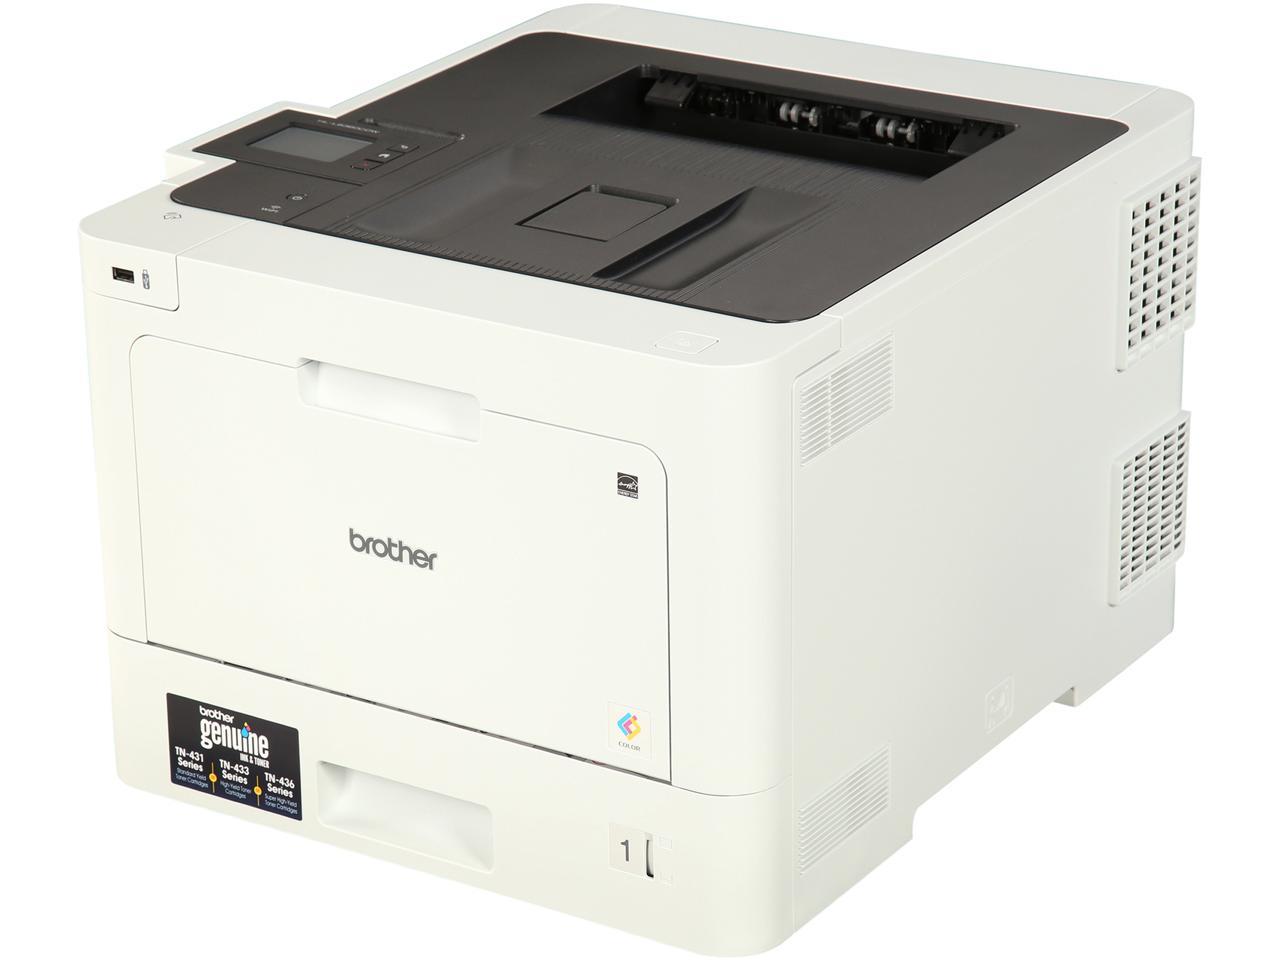 Brother Hl L8360cdw Business Wireless Color Laser Printer With Automatic Duplex Printing Mobile 1592